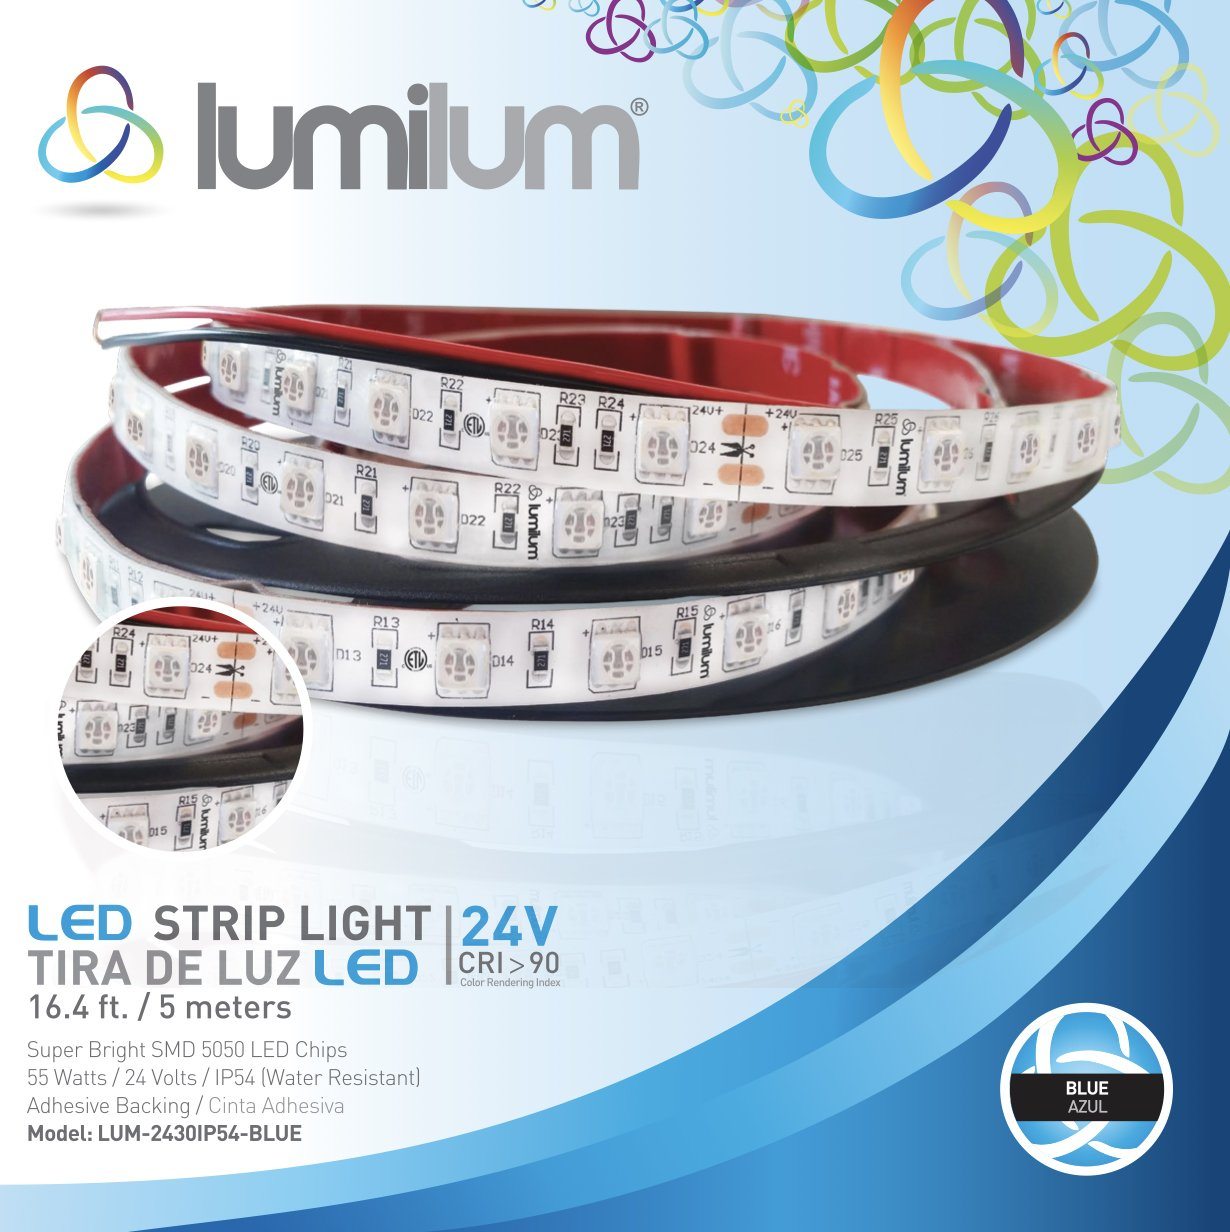 lumilum brand blue led strip light packaging with strip light image and intense blue product information text